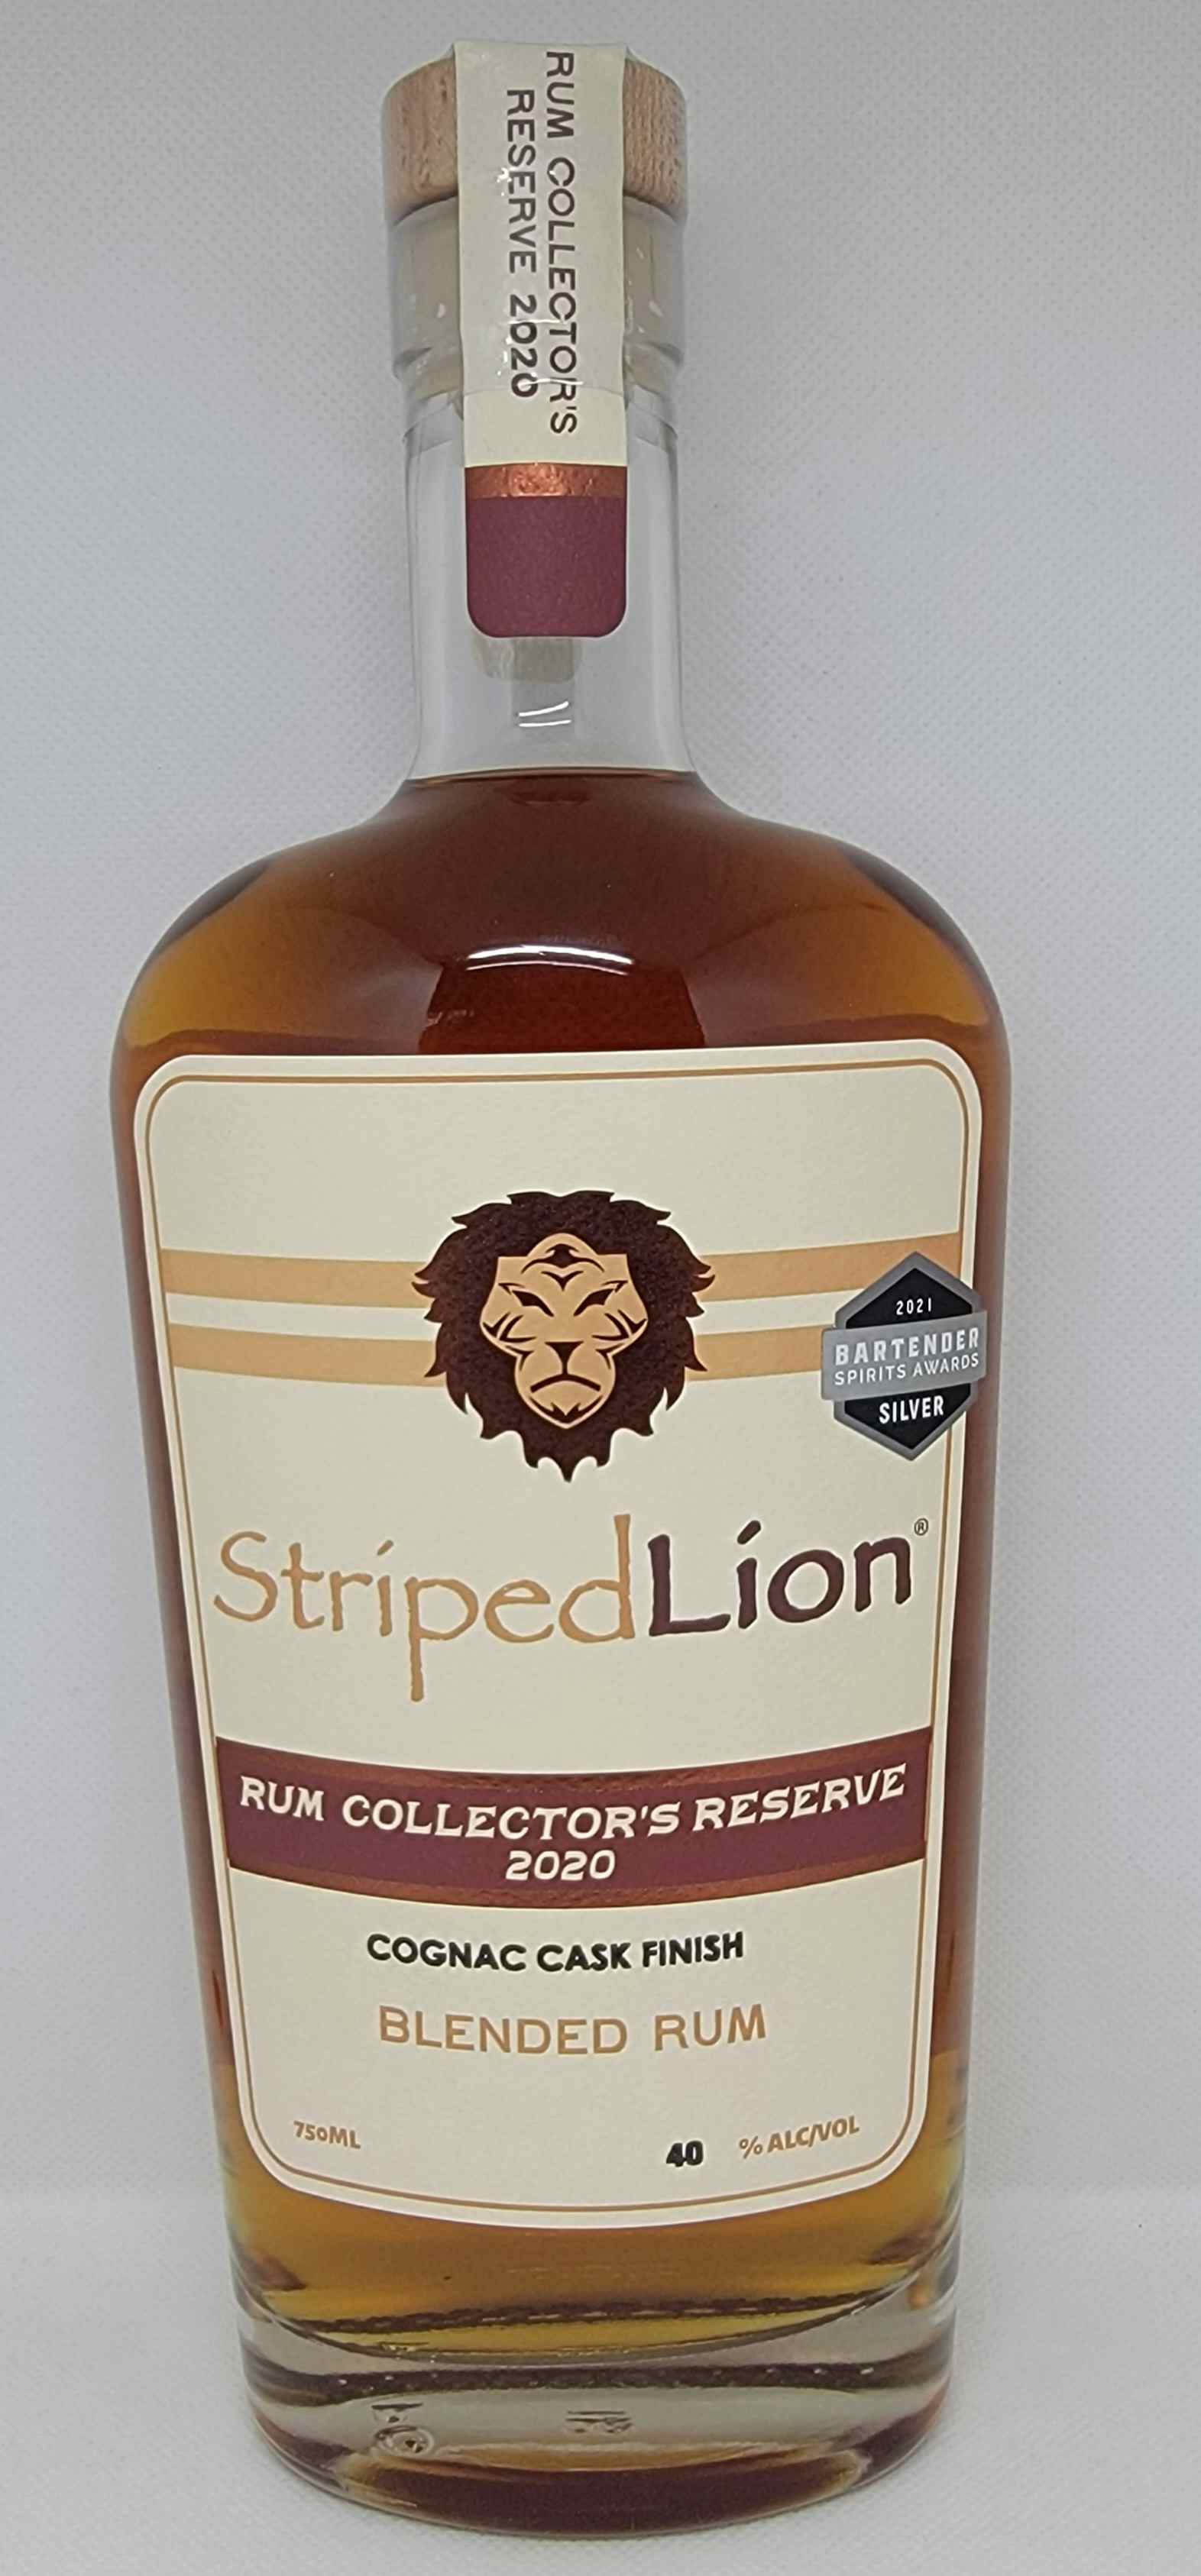 | & Drizly Reserve Rum Cask Lion Cognac Collector\'s Finish Price Striped Reviews Rum 2020